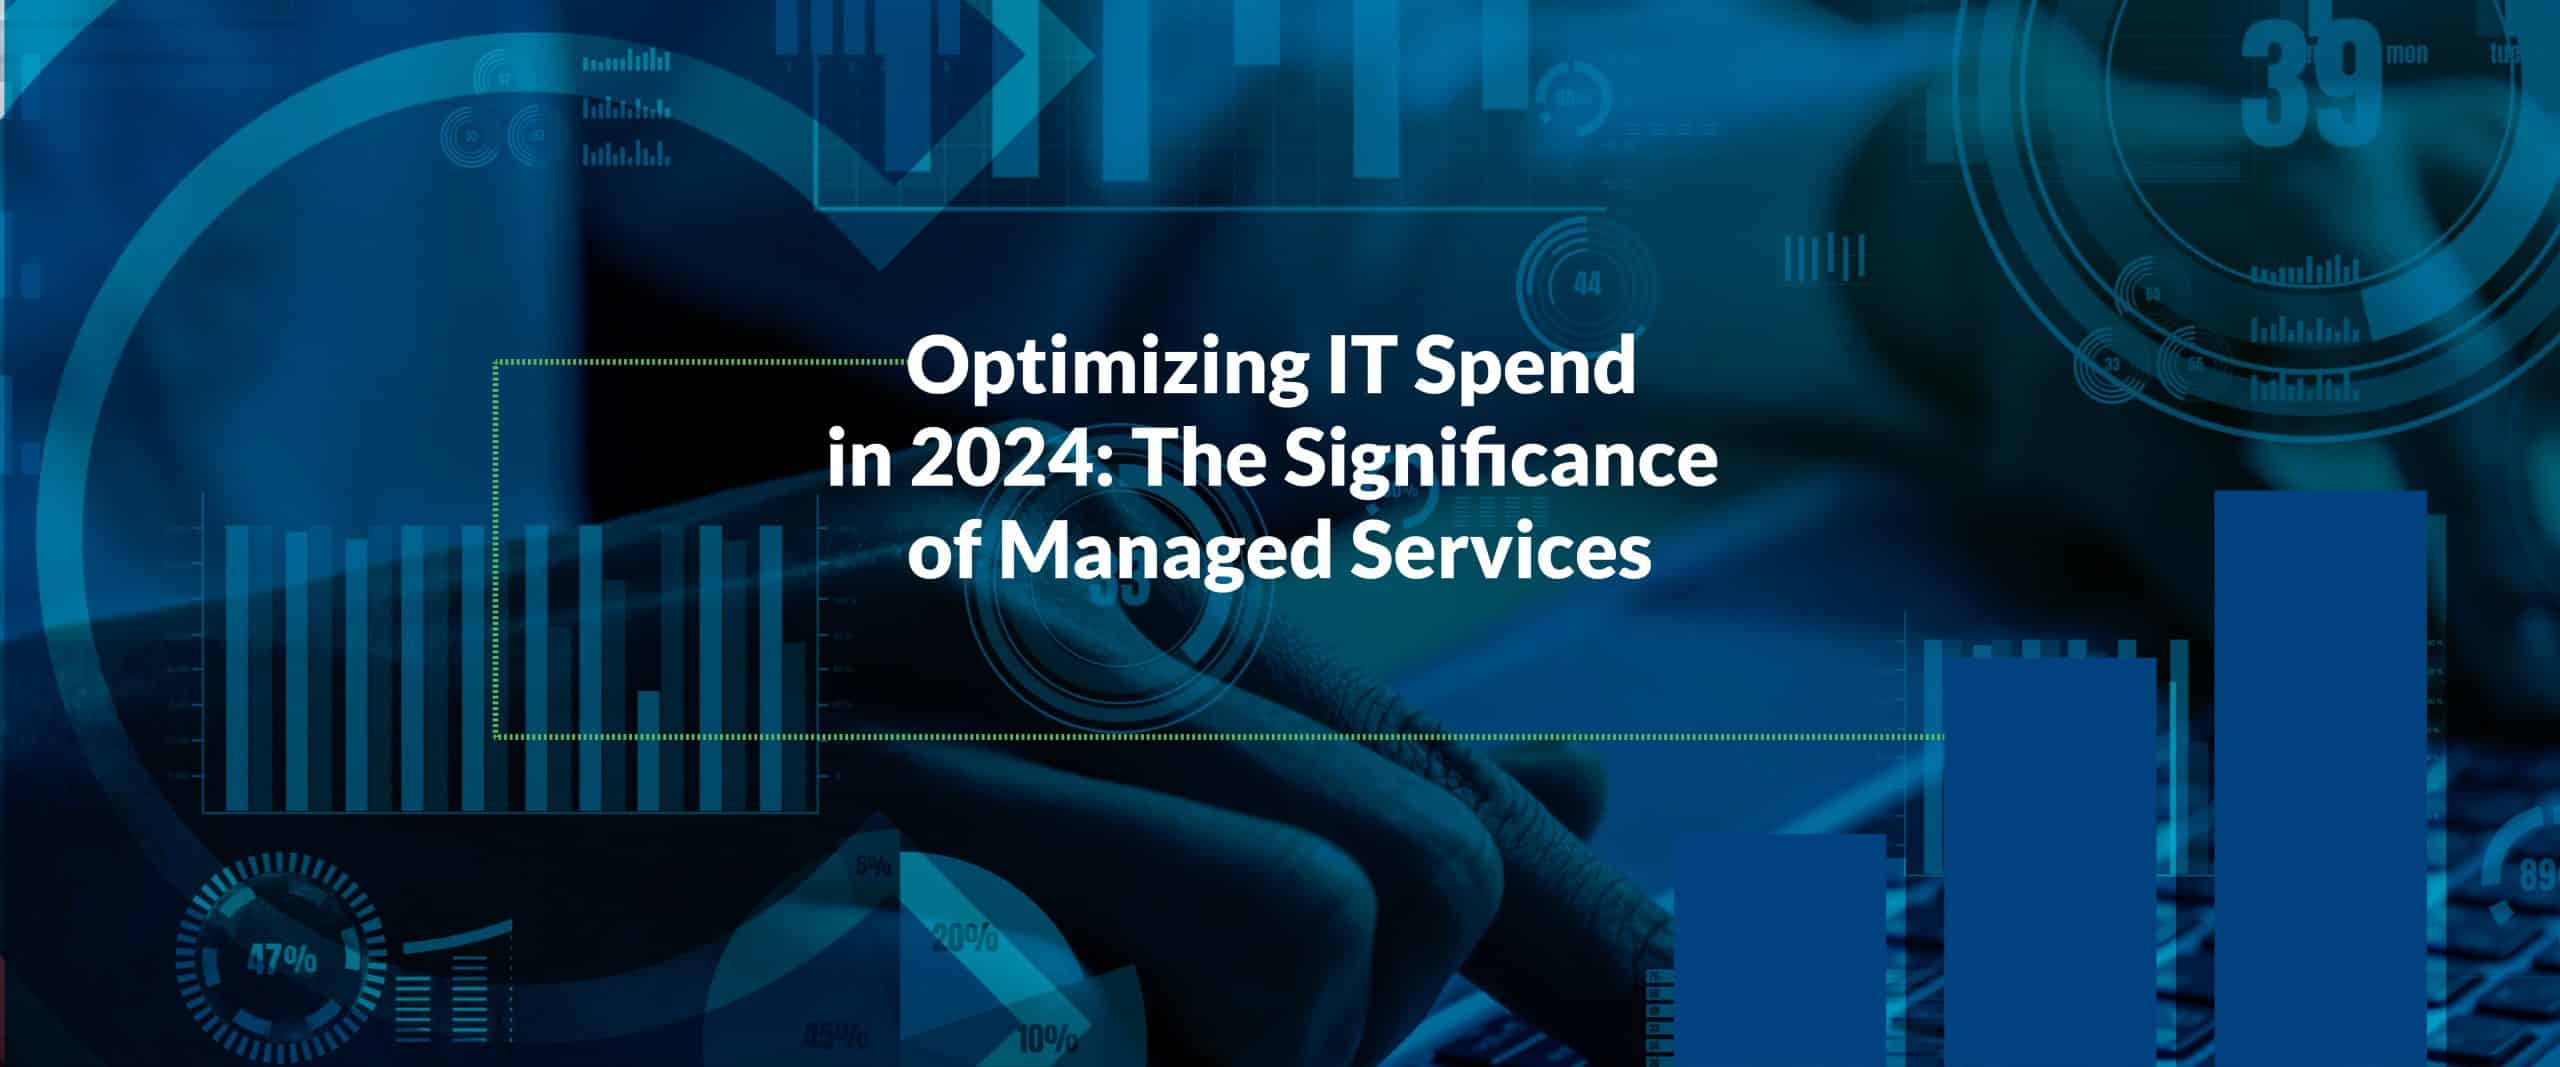 Optimizing IT Spend in 2024: The Significance of Managed Services